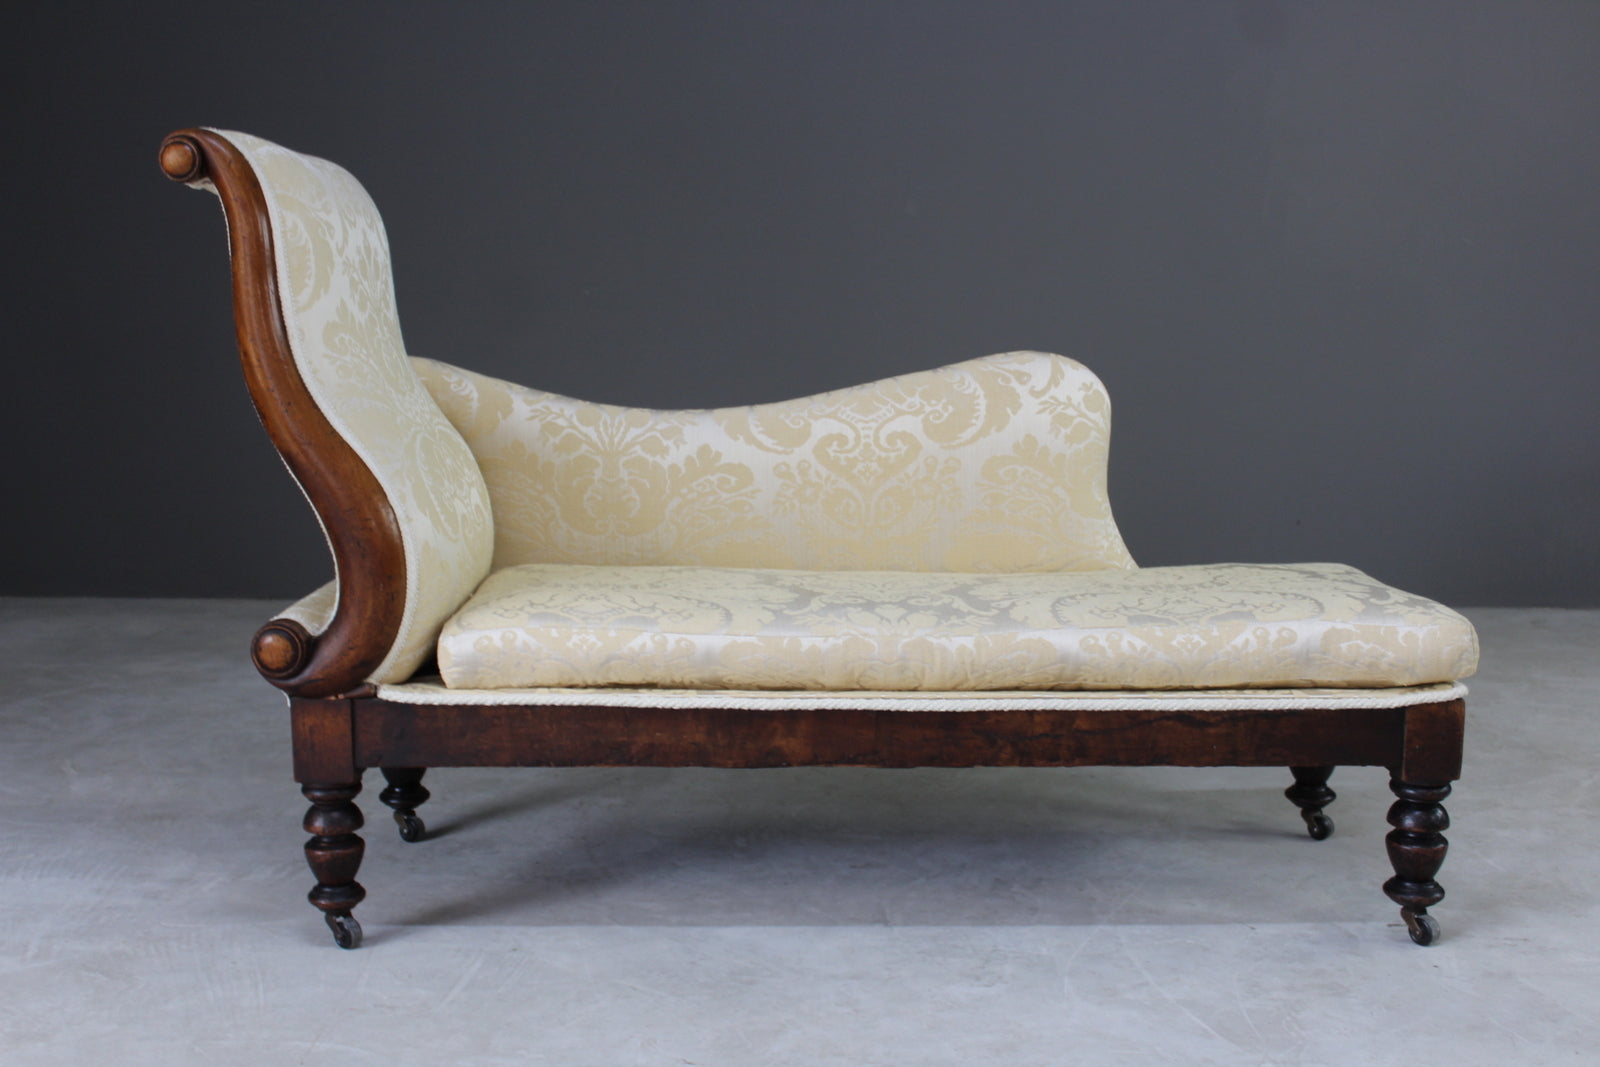 Antique Upholstered Chaise Longue - Kernow Furniture